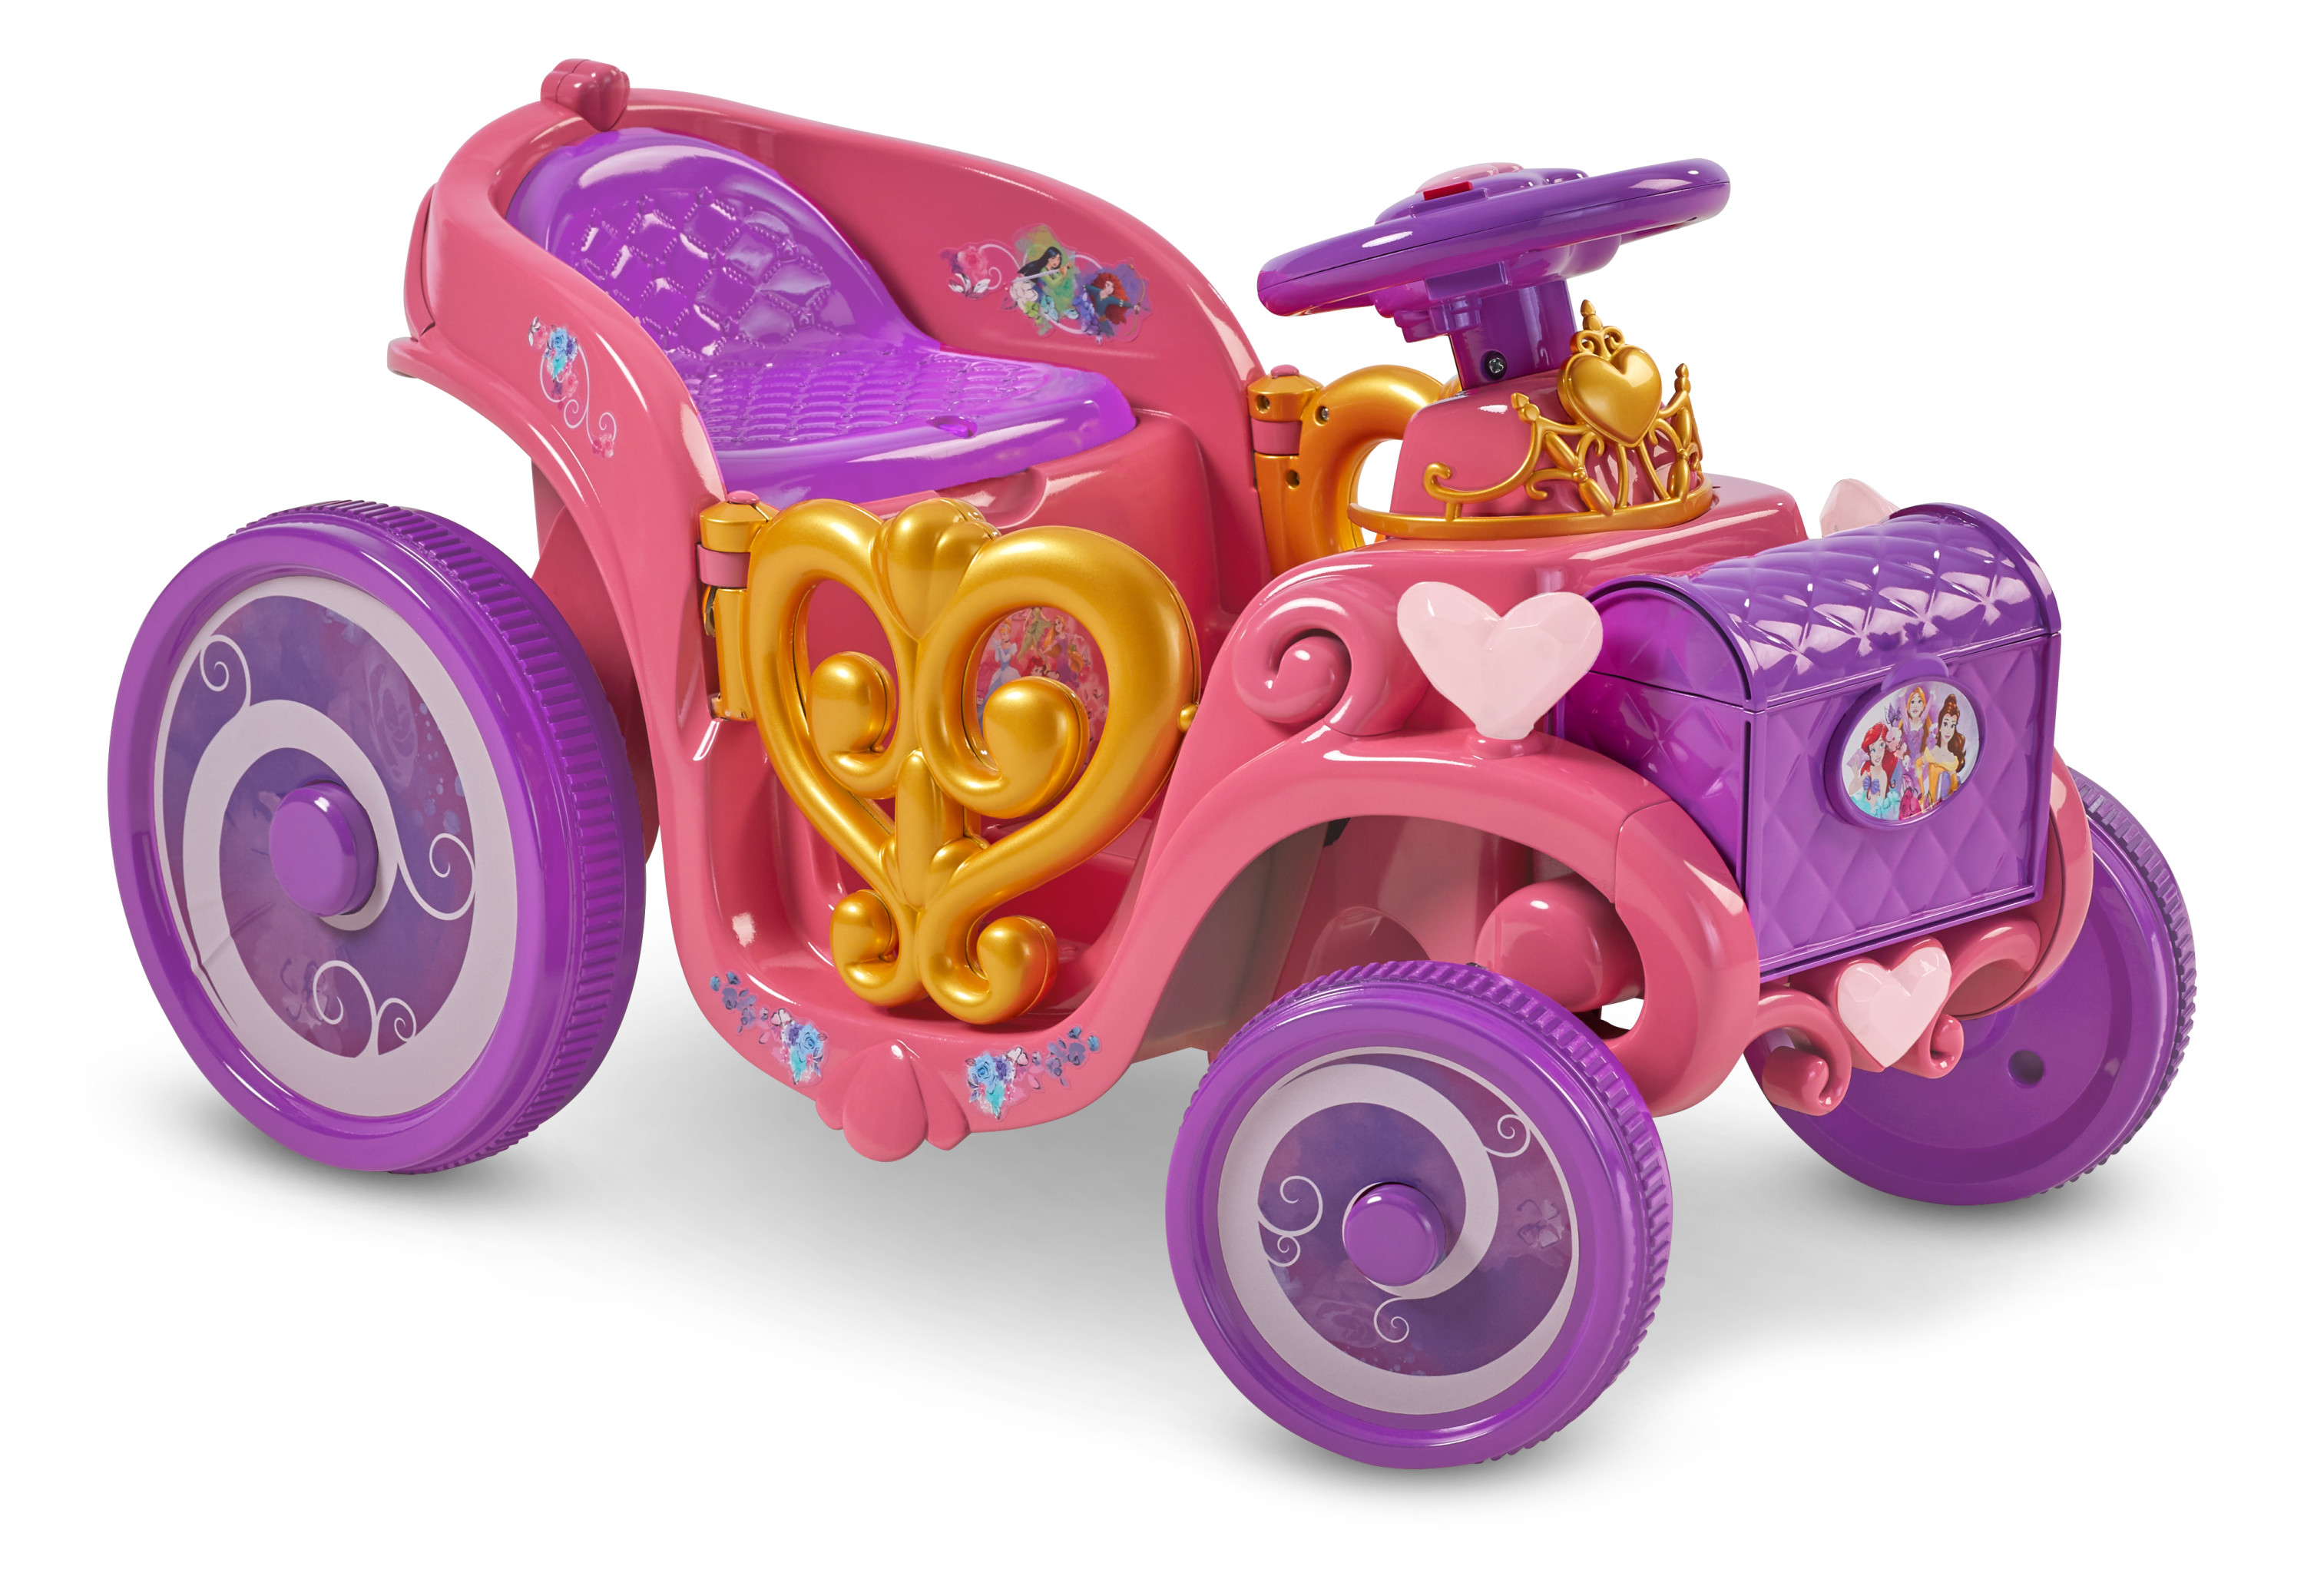 Disney Princess Enchanted Adventure Carriage Quad, 6-Volt Ride-On Toy by Kid Trax, ages 18-30 months, pink - image 7 of 8